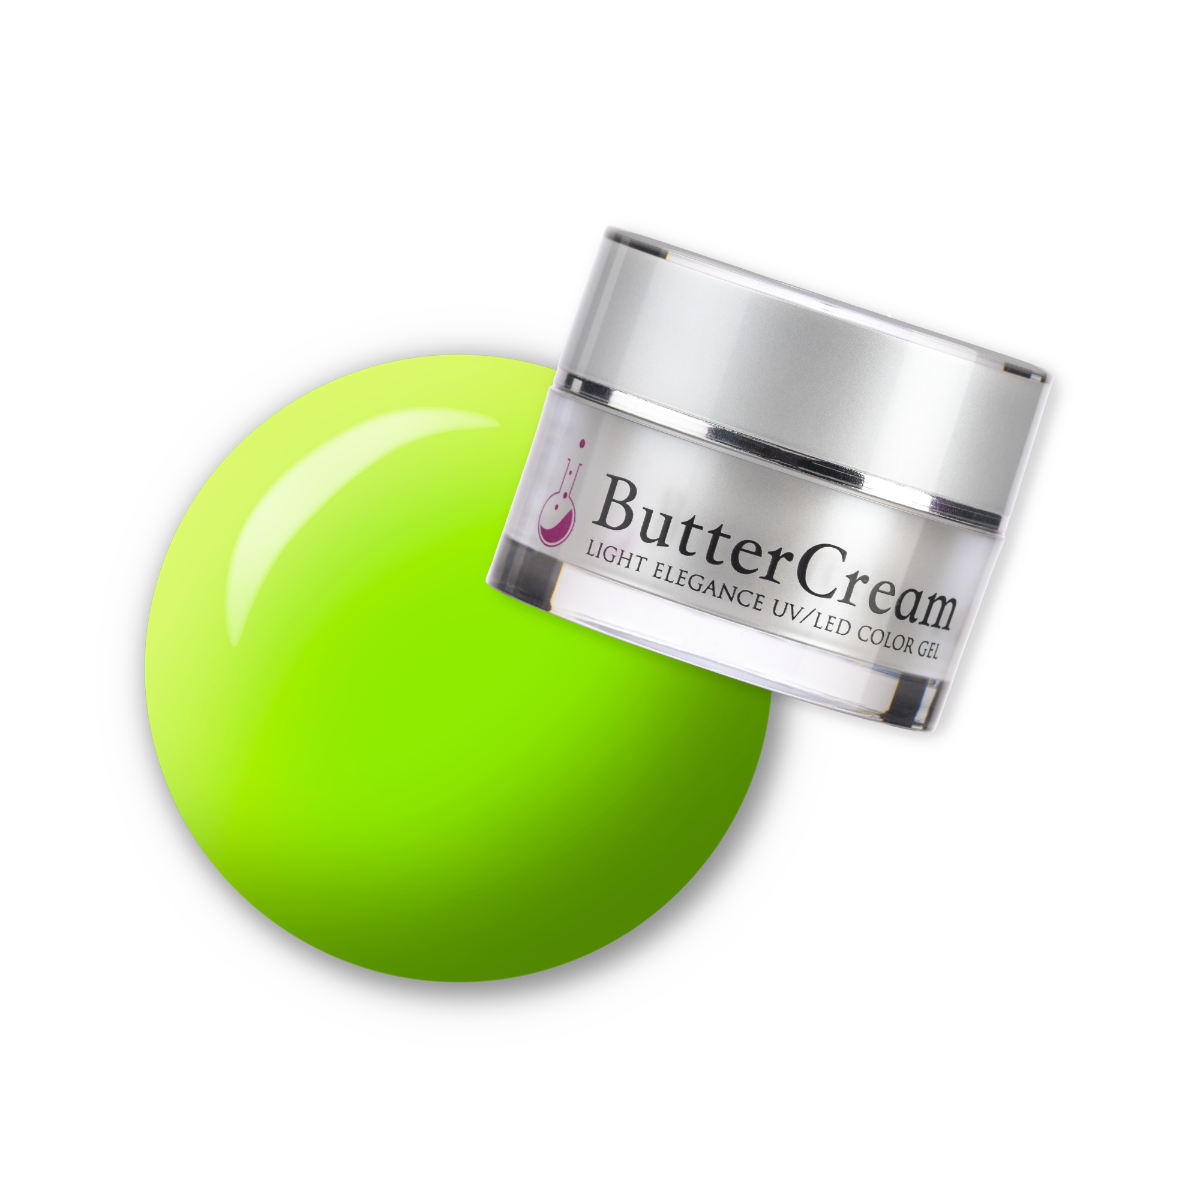 Light Elegance ButterCreams LED/UV - Groovy Green :: New Packaging - Creata Beauty - Professional Beauty Products